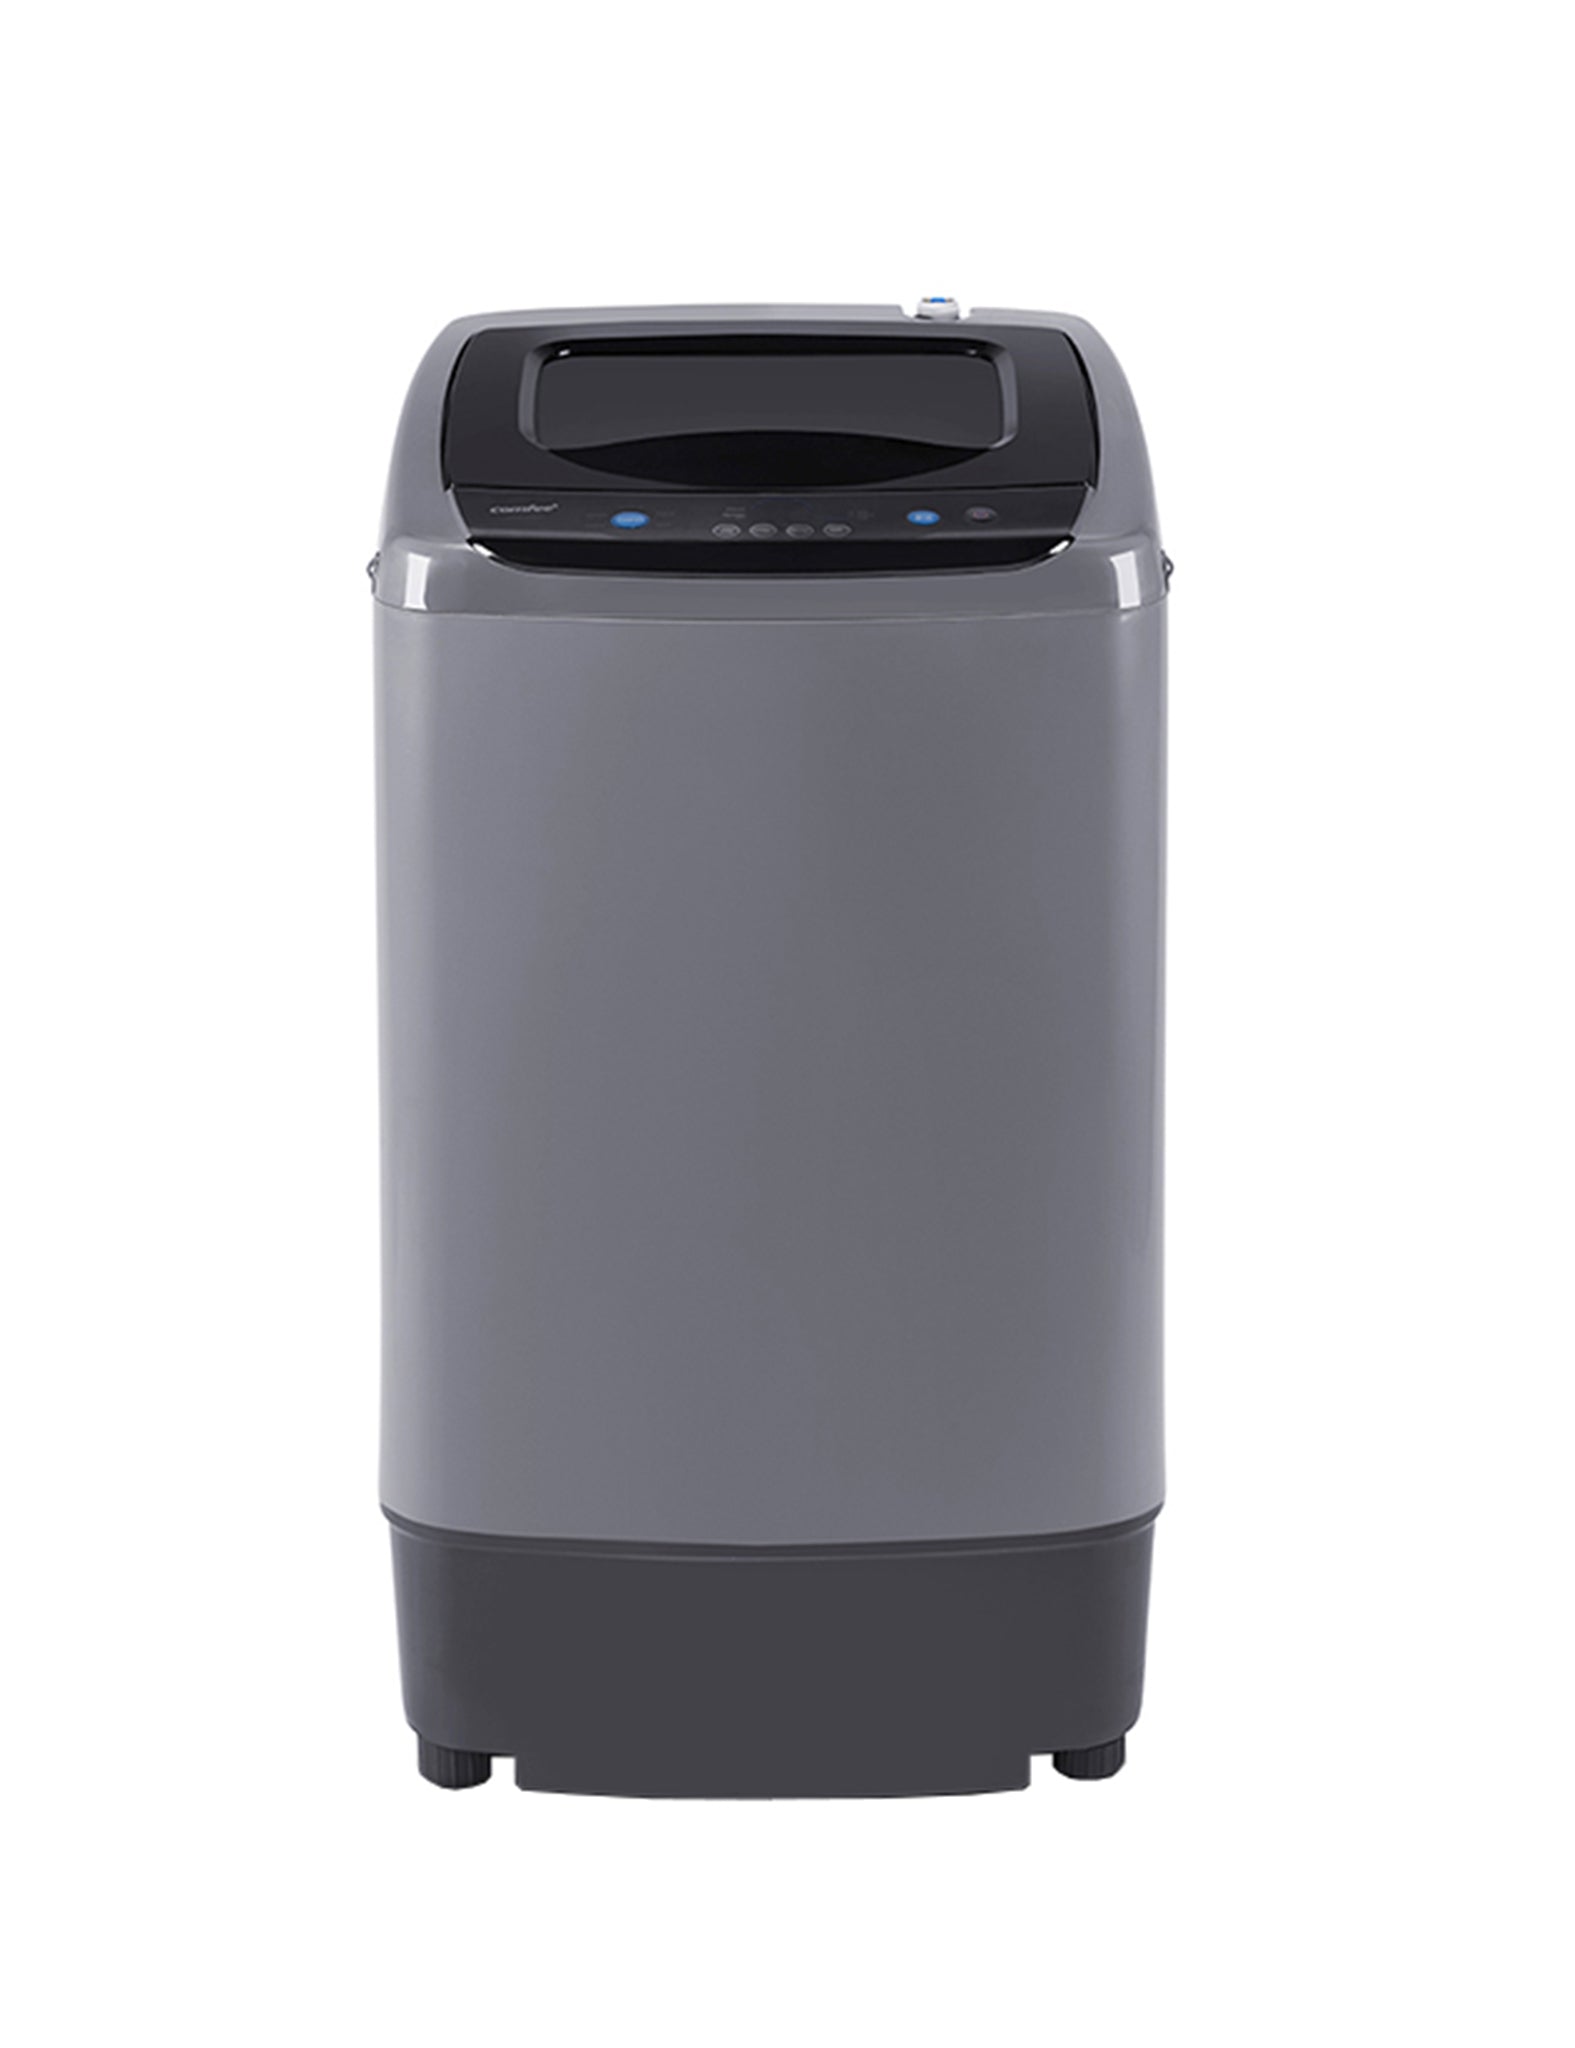 COMFEE' Portable Washing Machine With LED Display 0.9 Cu Ft for